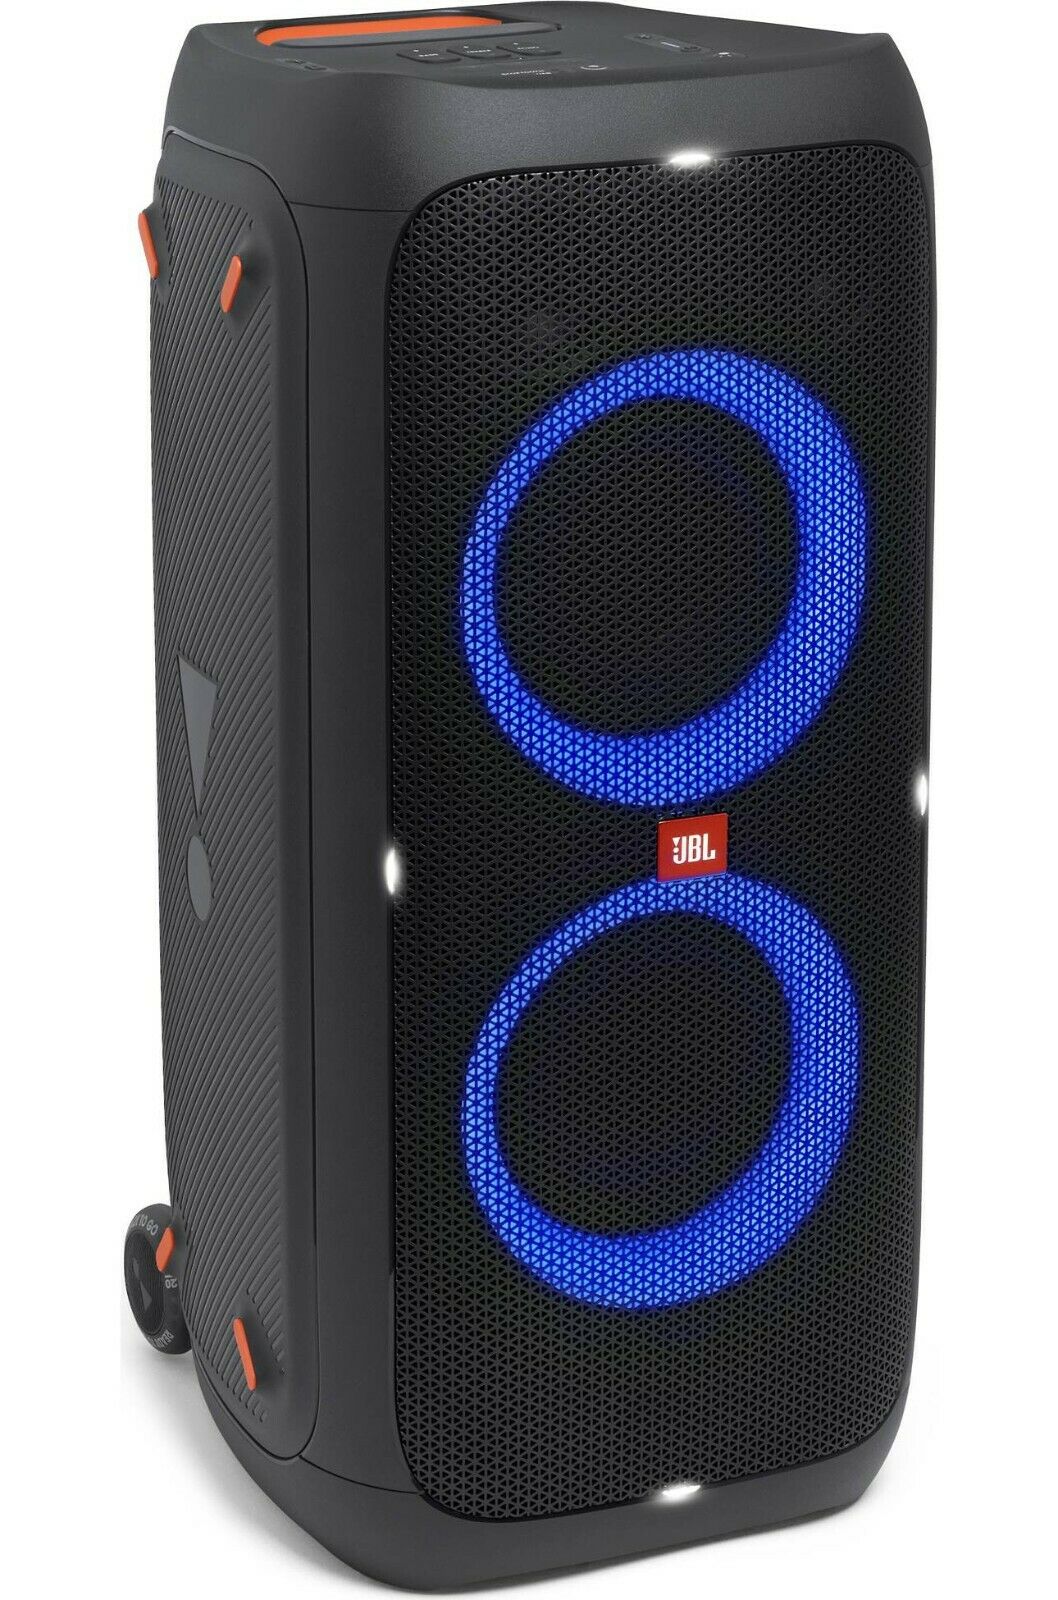 Jbl Partybox 310 Portable Bluetooth Speaker With Party Lights